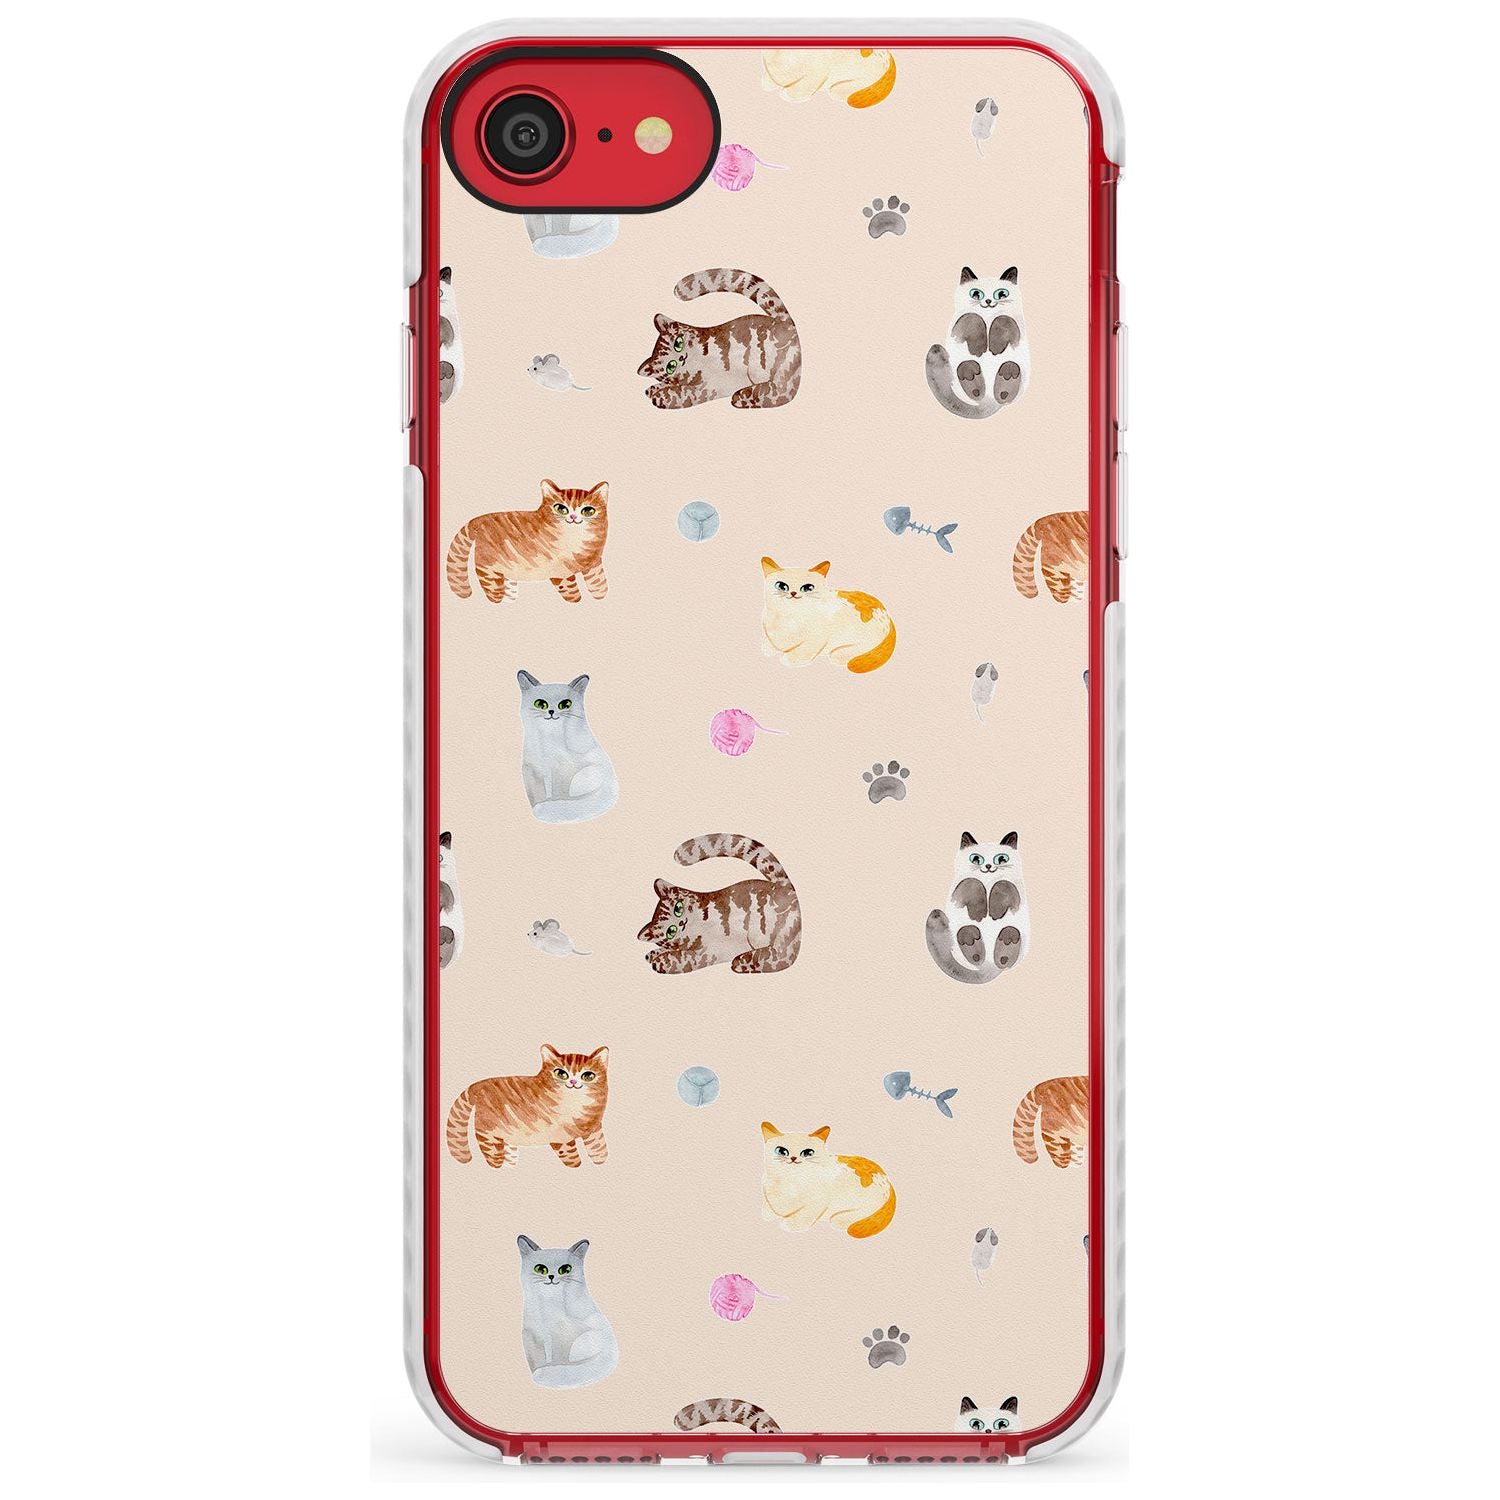 Cats with Toys Slim TPU Phone Case for iPhone SE 8 7 Plus